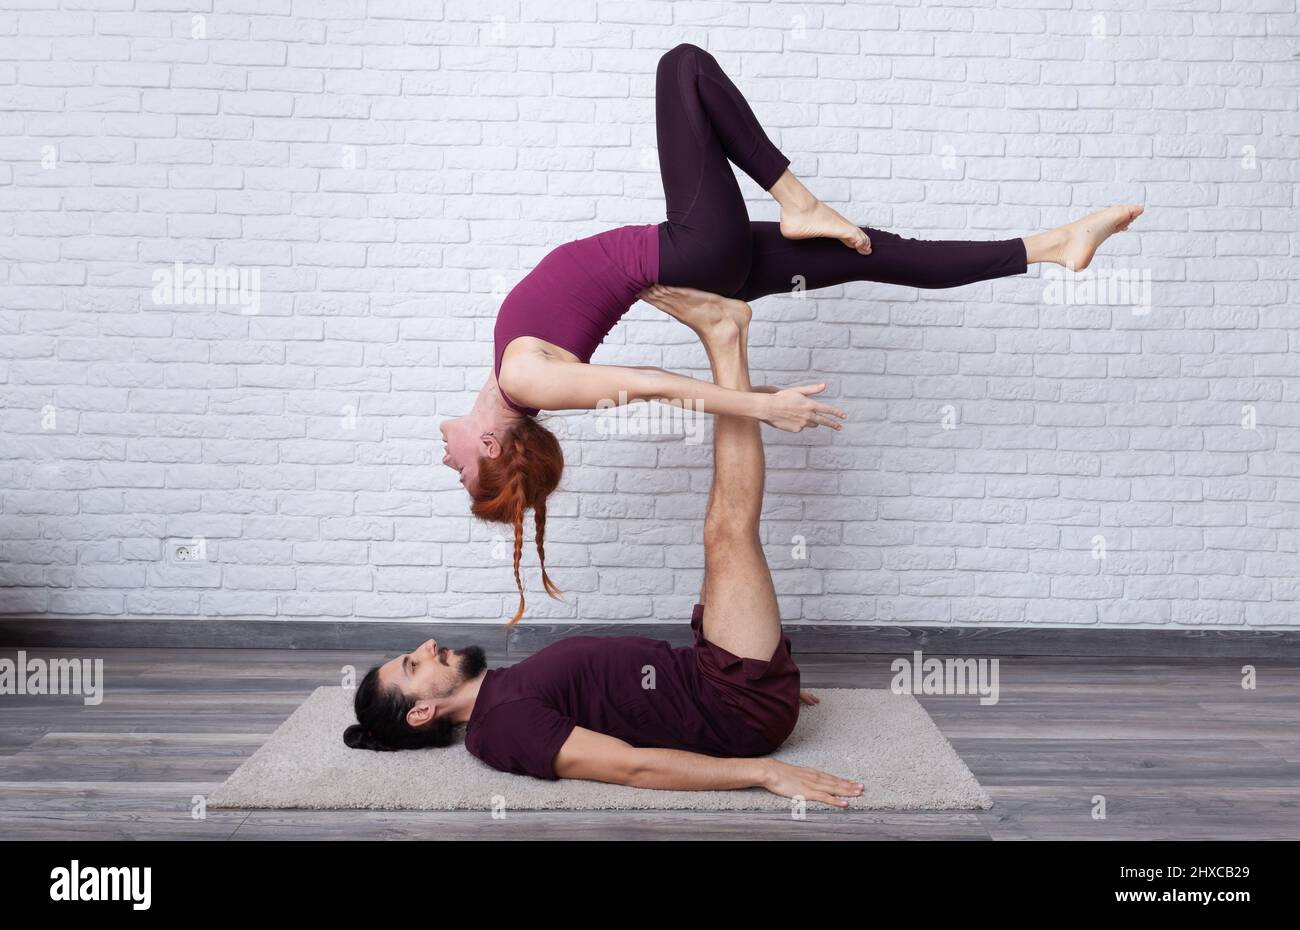 young couple having fun at home with some acro yoga poses in different places 2HXCB29